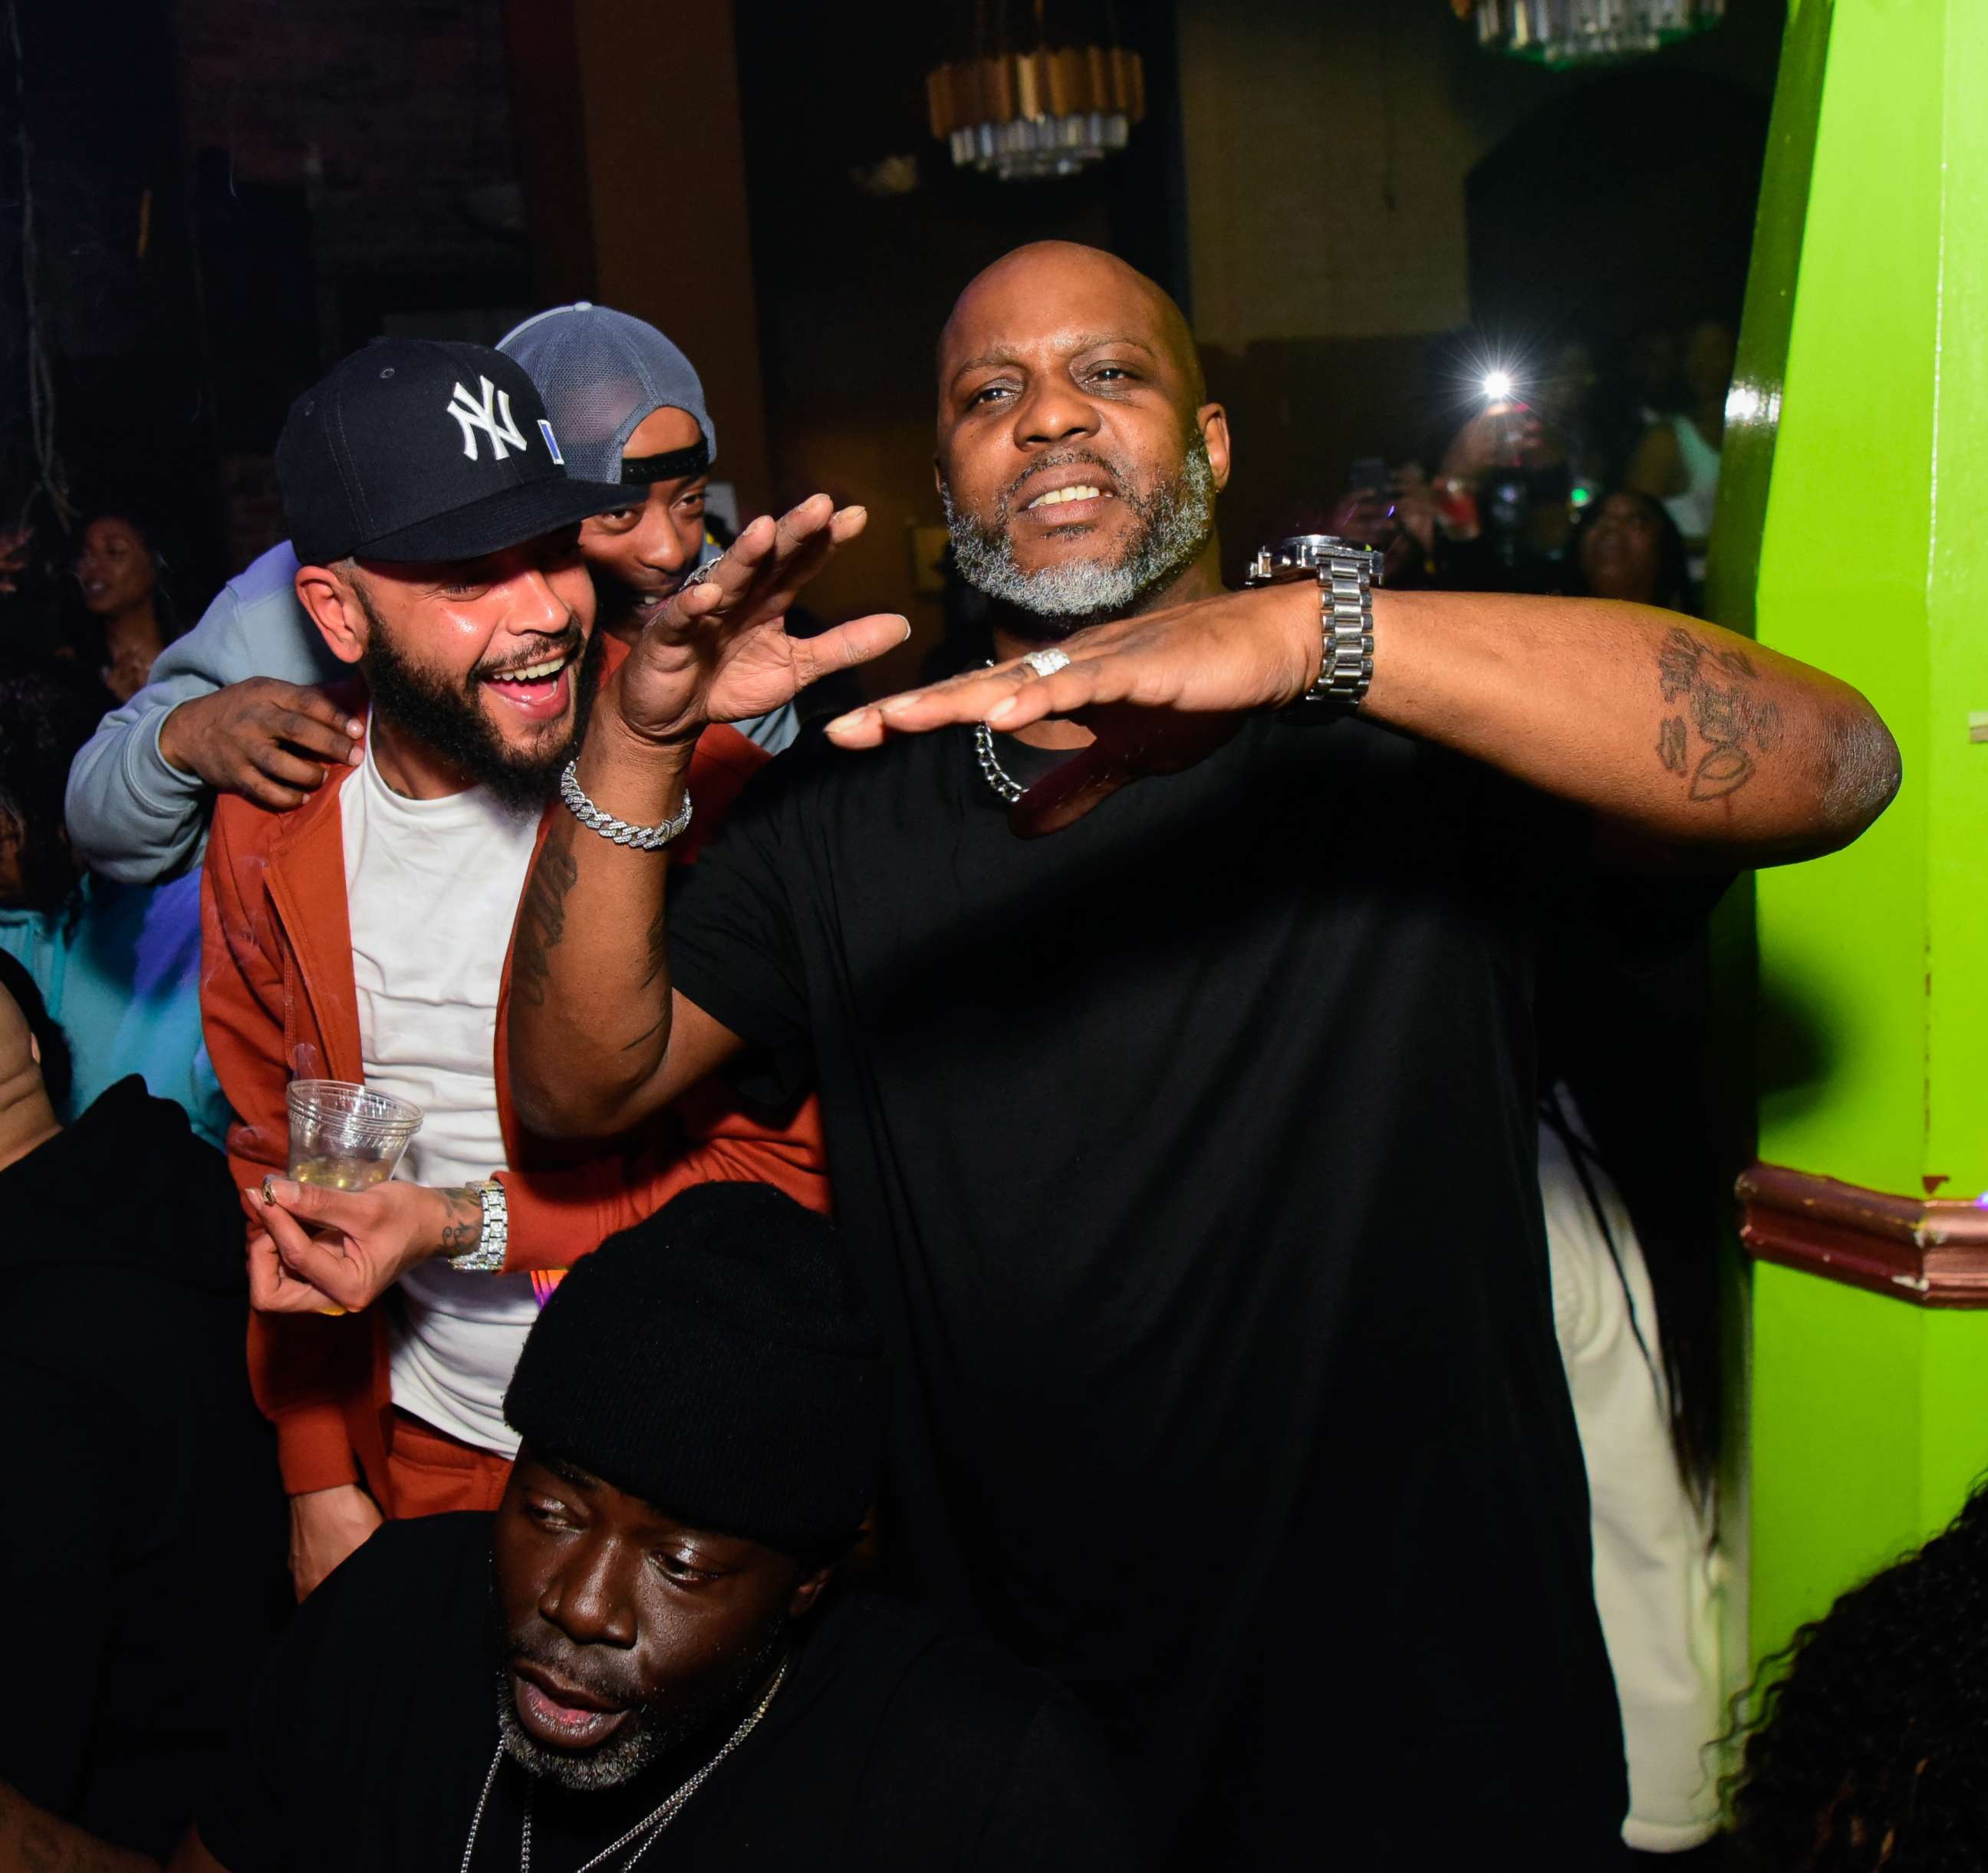 PHOTO: DMX attends a Party at Elleven45 Lounge in Atlanta, Feb. 19, 2021.